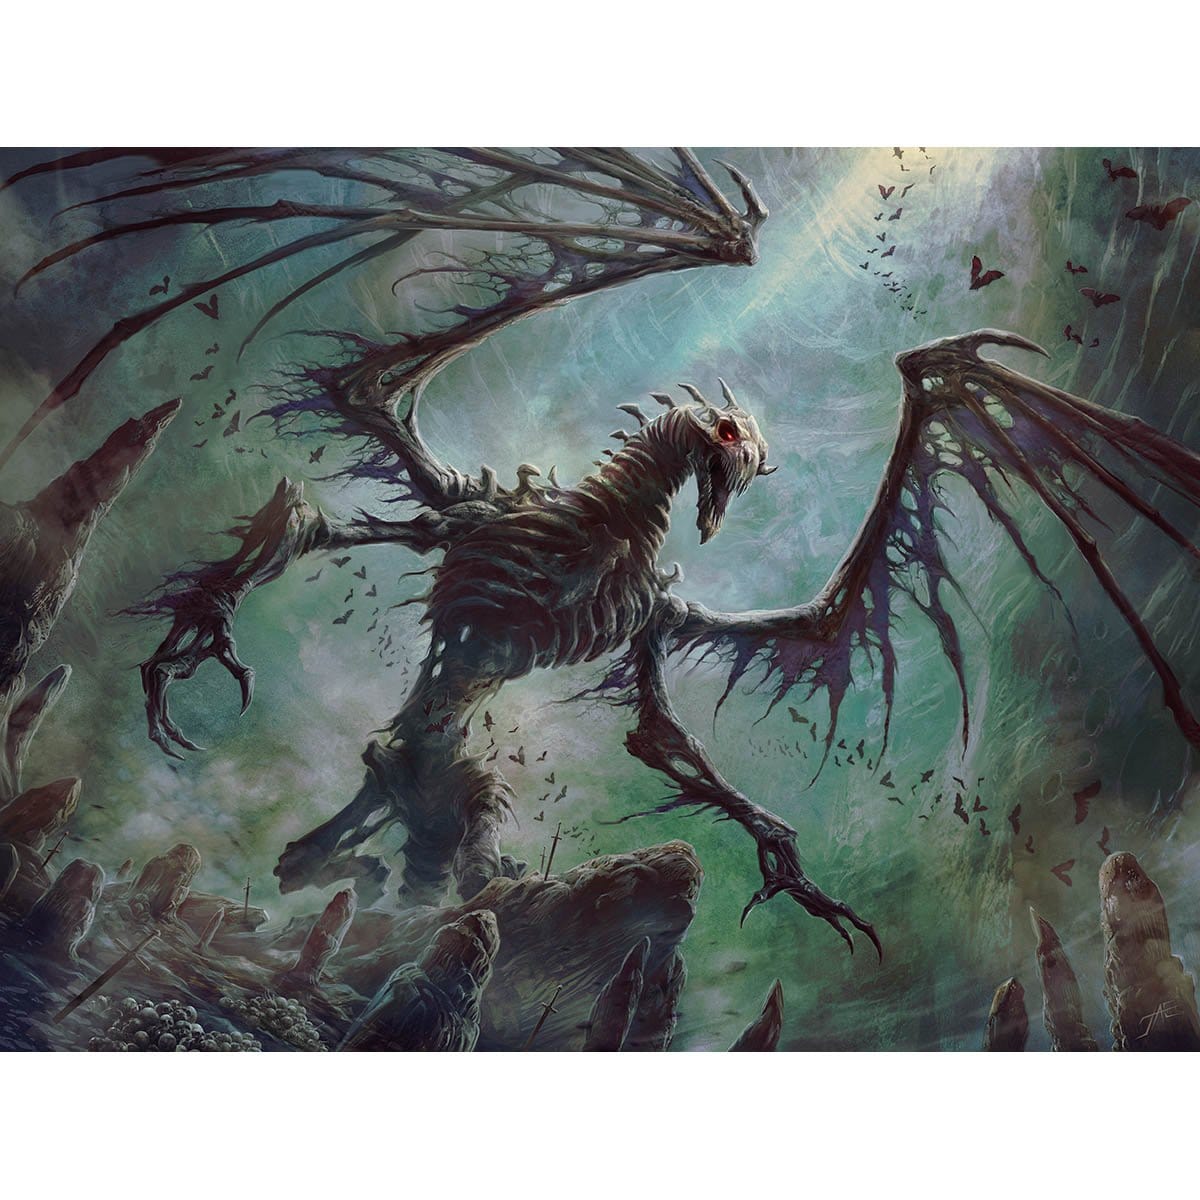 Bone Dragon Print - Print - Original Magic Art - Accessories for Magic the Gathering and other card games